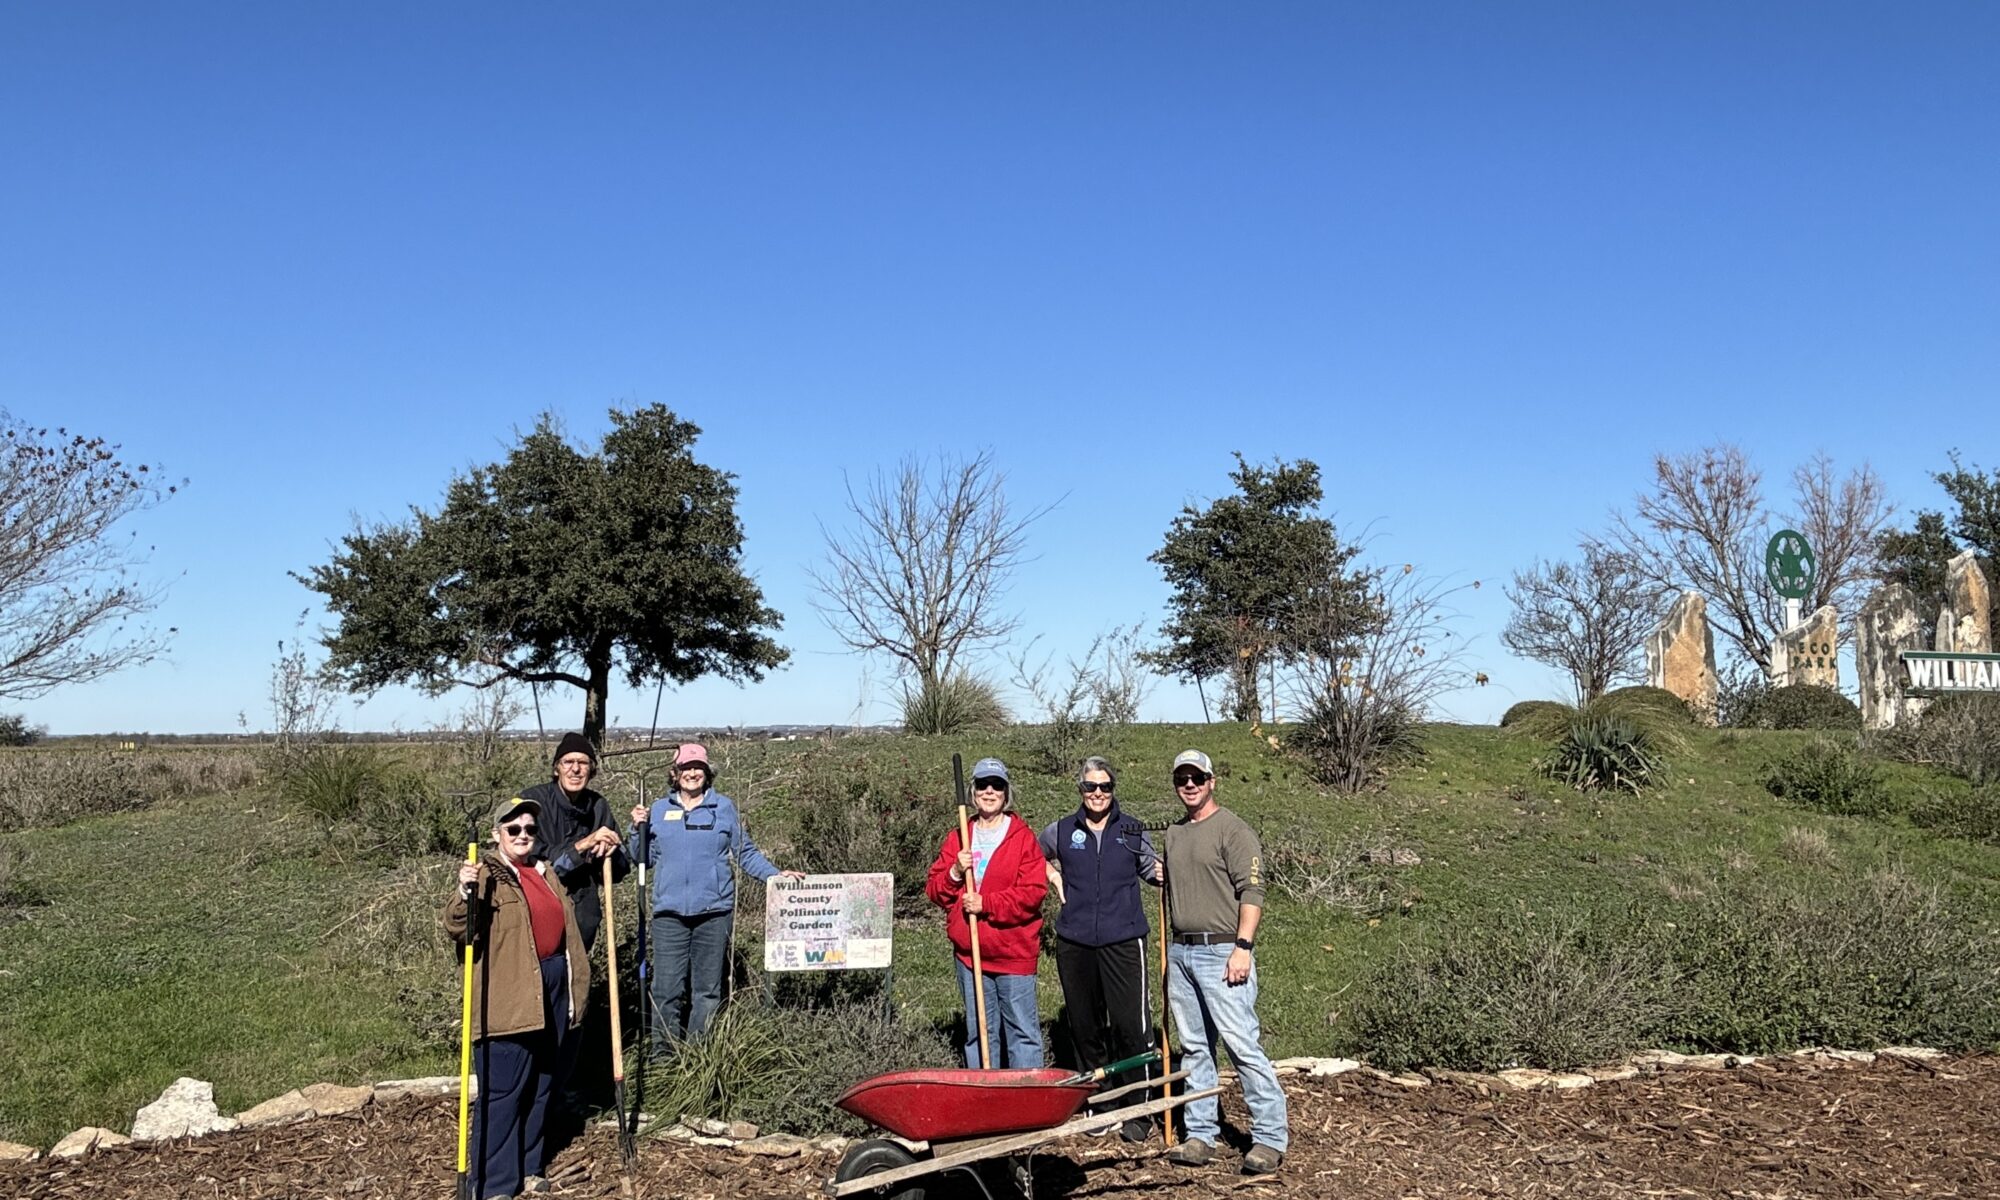 This image shows the volunteer crew gathered around the project sign in celebration of completing the mulch spreading.